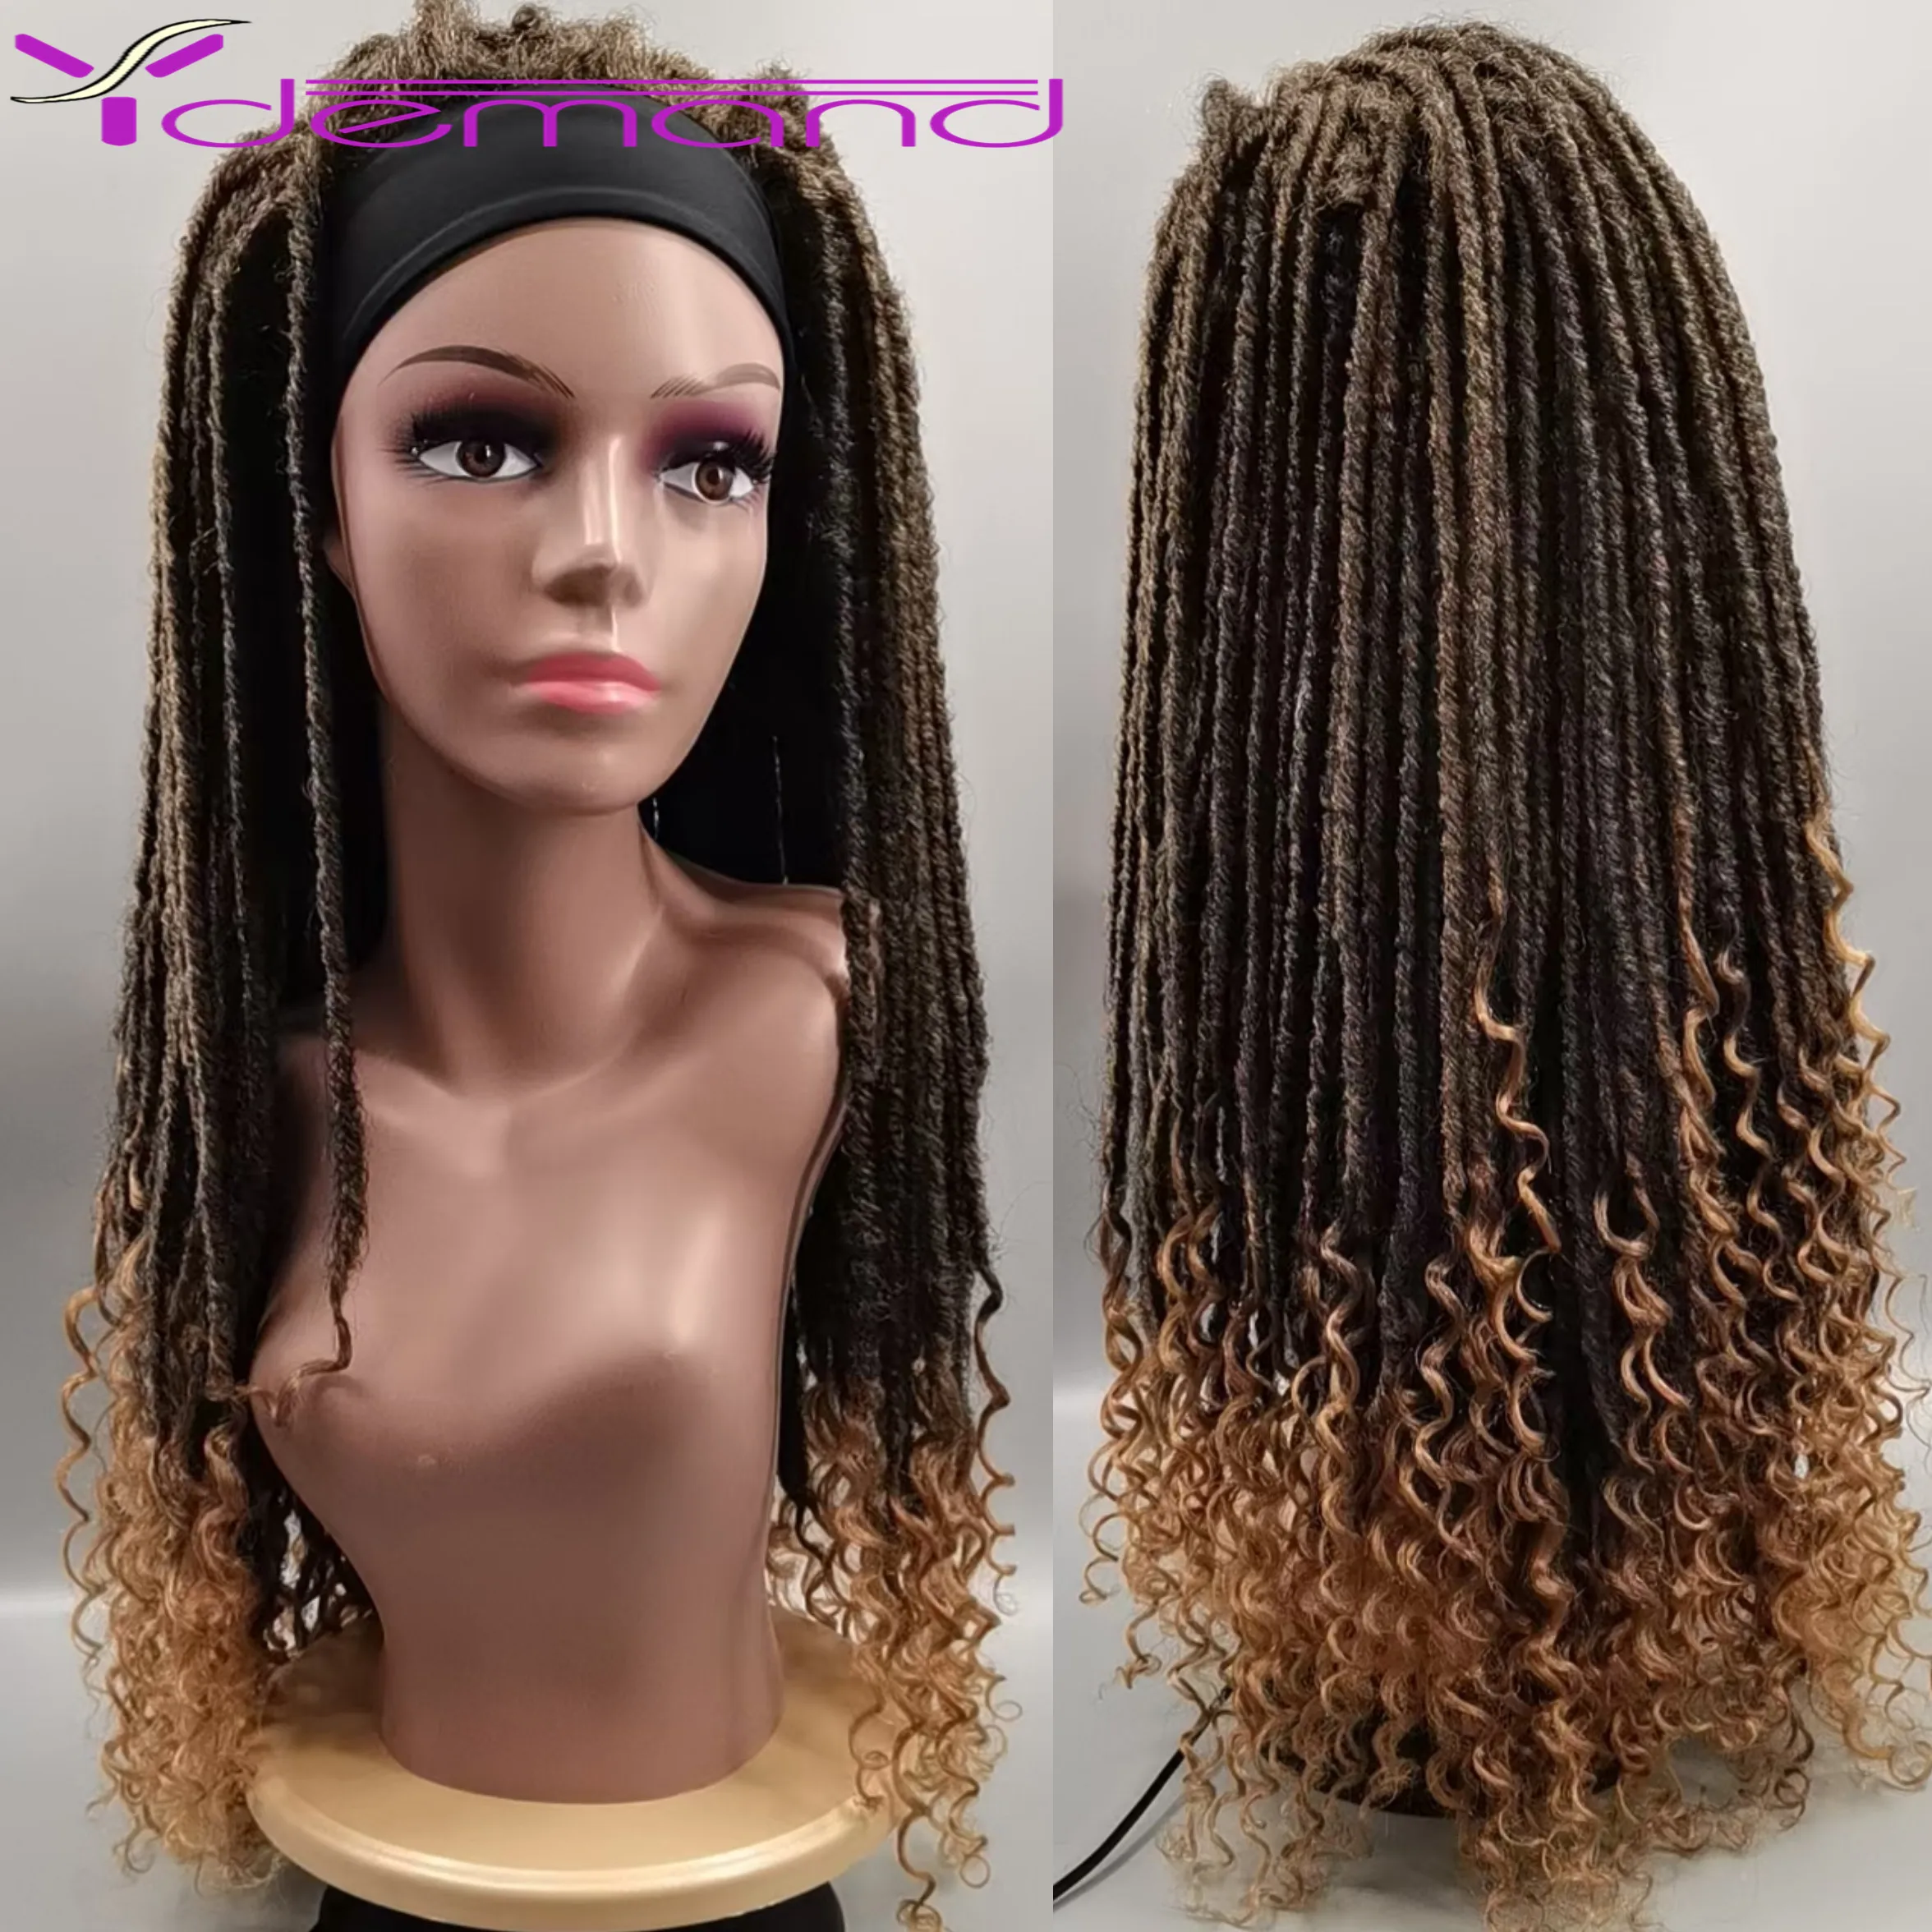 Y Demand Headband Faux Locs Goddess Braids Wig Ombre Brown Long Braided African Wig Synthetic Braiding Hair For Negro Women/Men